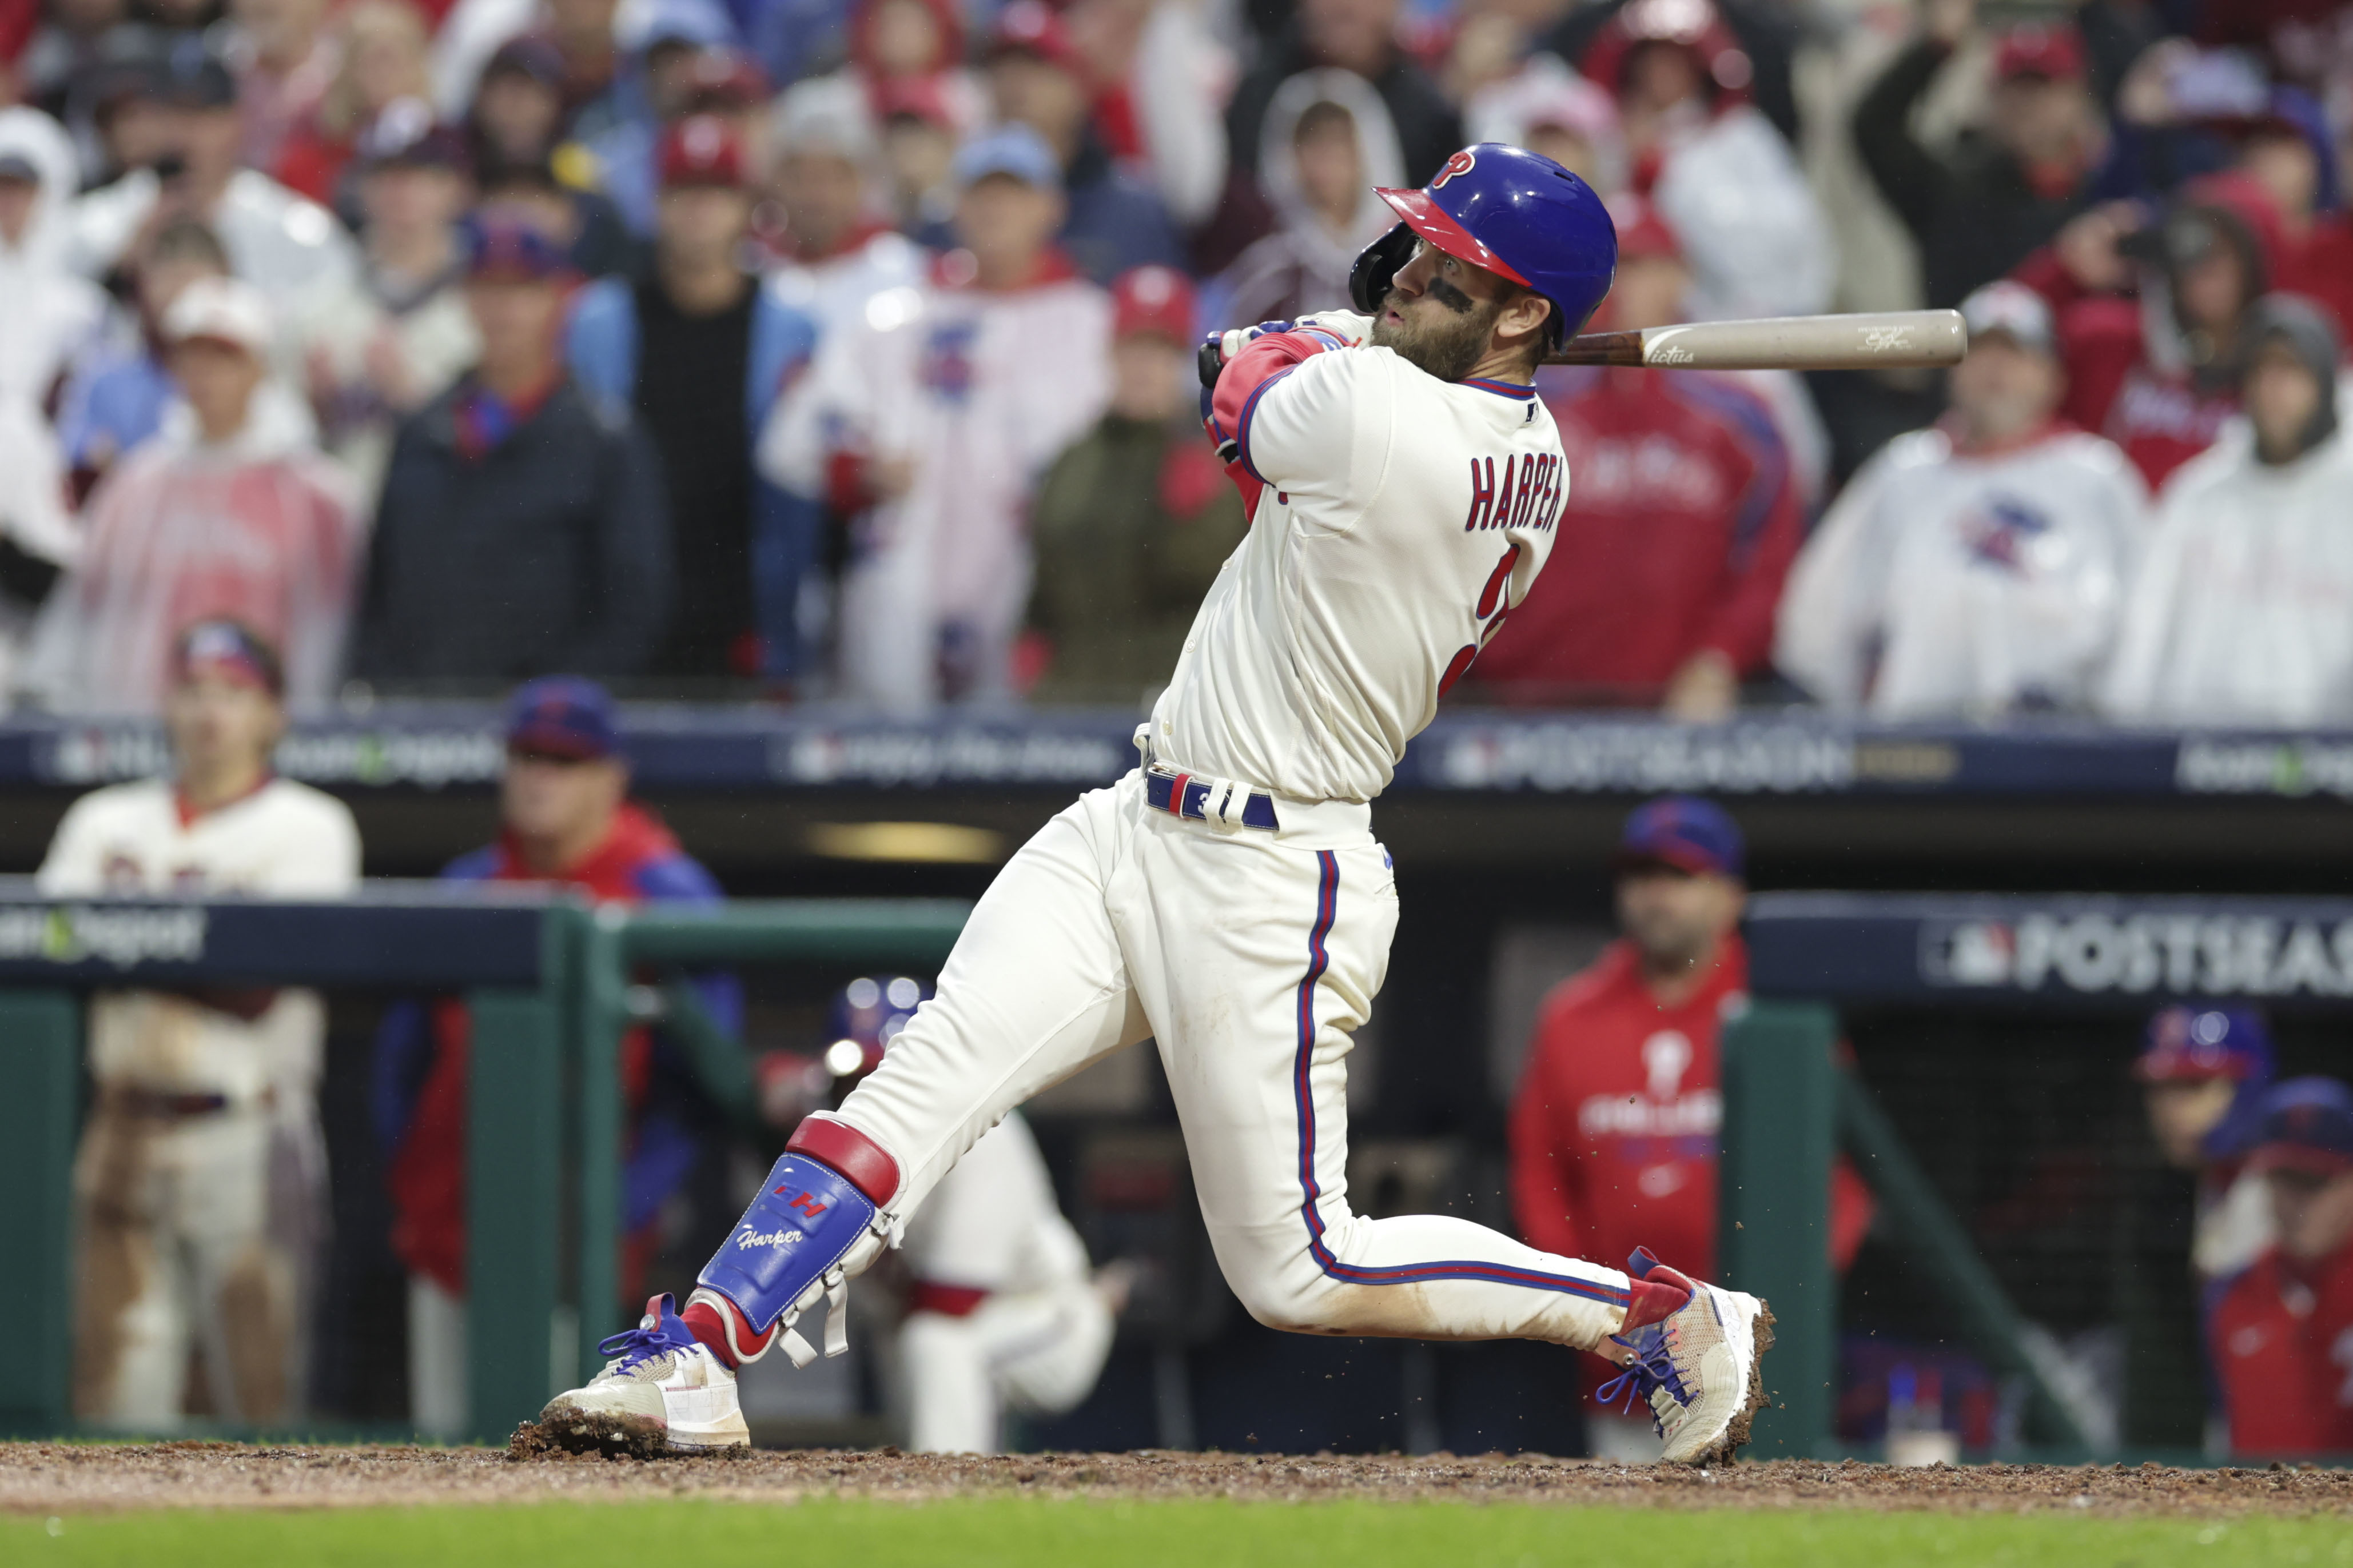 Ranger Suárez exits early, Phillies blown out in fifth straight loss   Phillies Nation - Your source for Philadelphia Phillies news, opinion,  history, rumors, events, and other fun stuff.